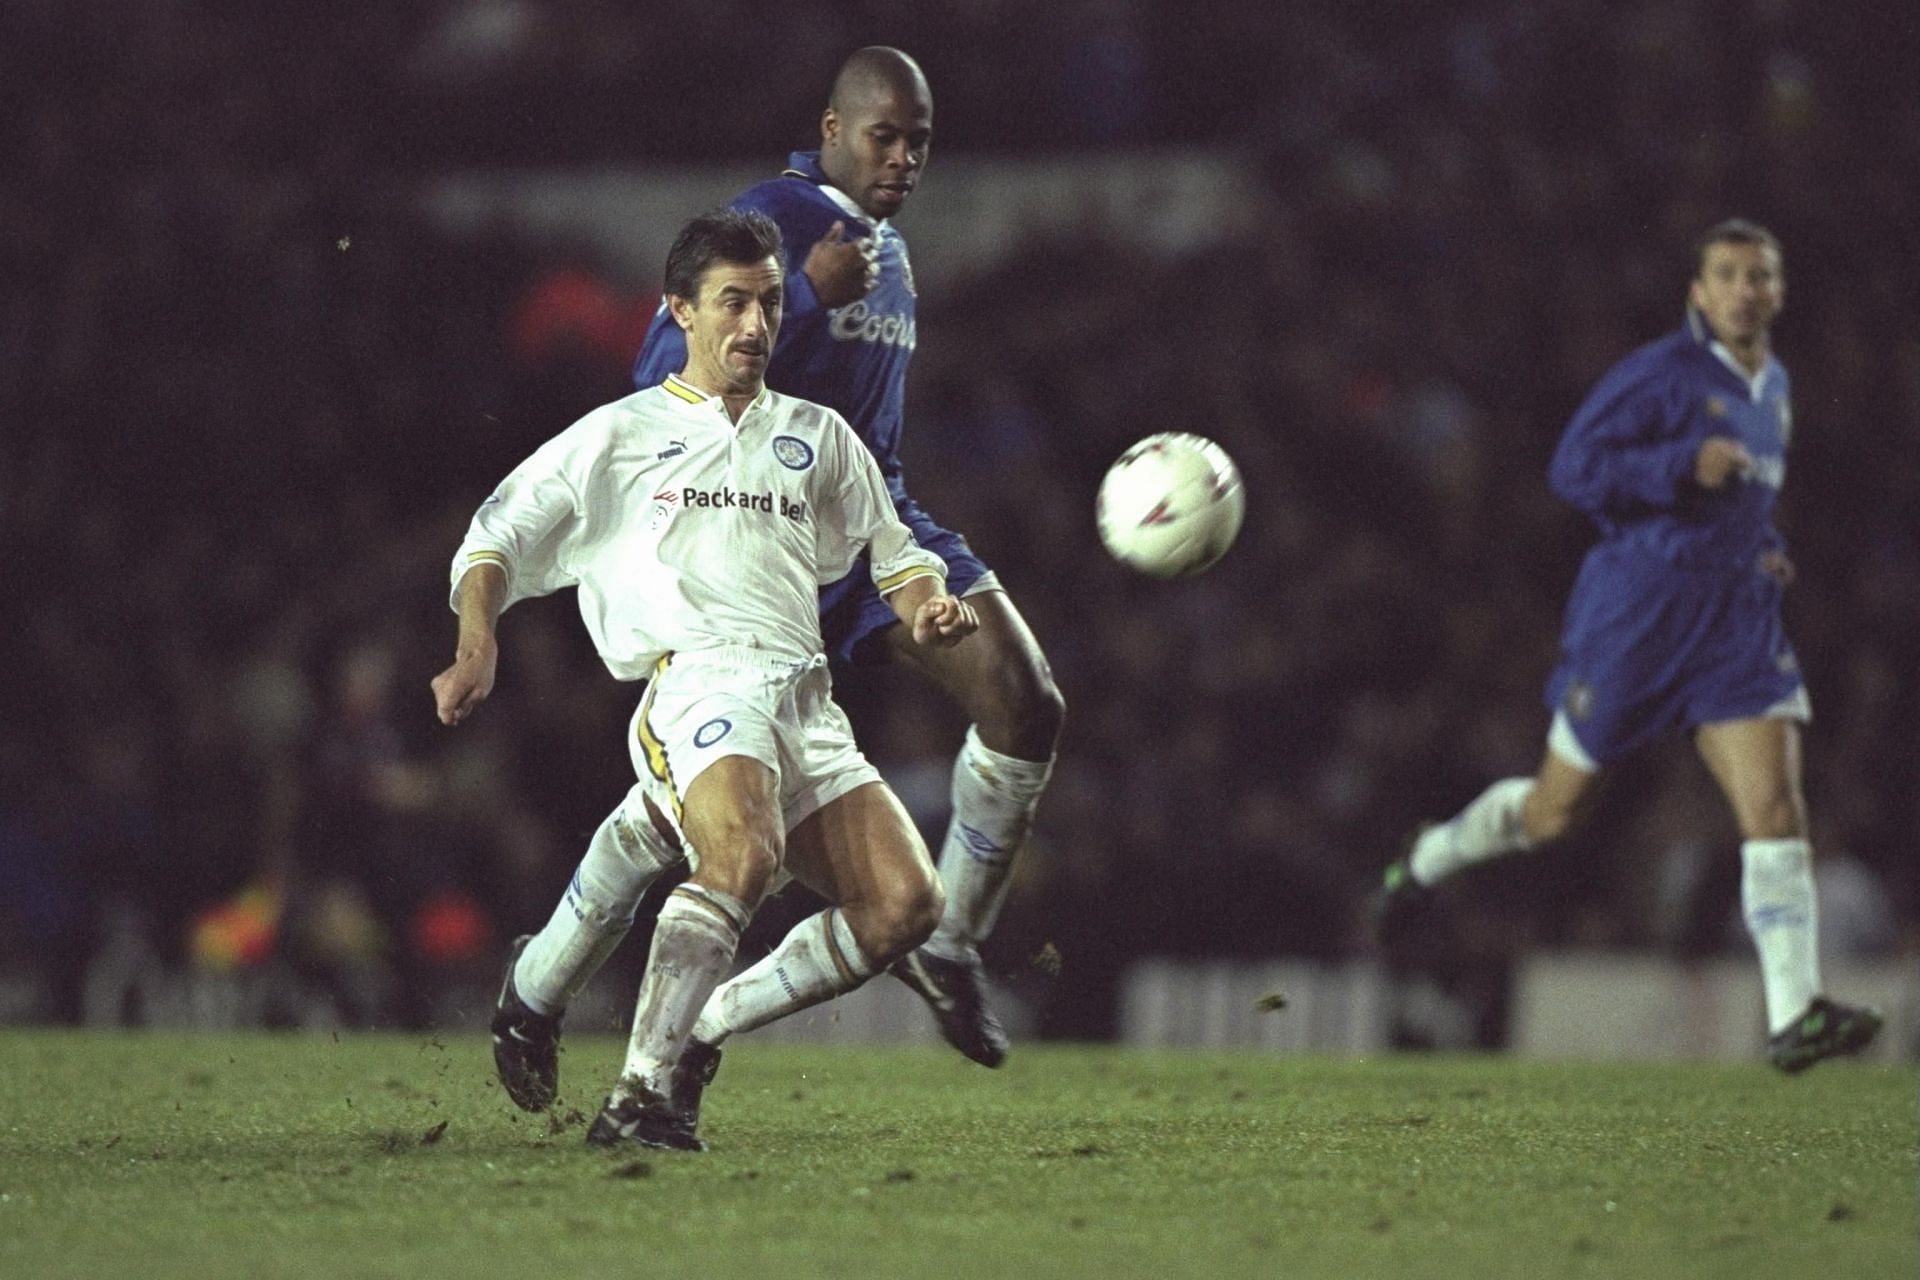 Ian Rush of Leeds (left) gets to the ball ahead of Mike Duberry of Chelsea